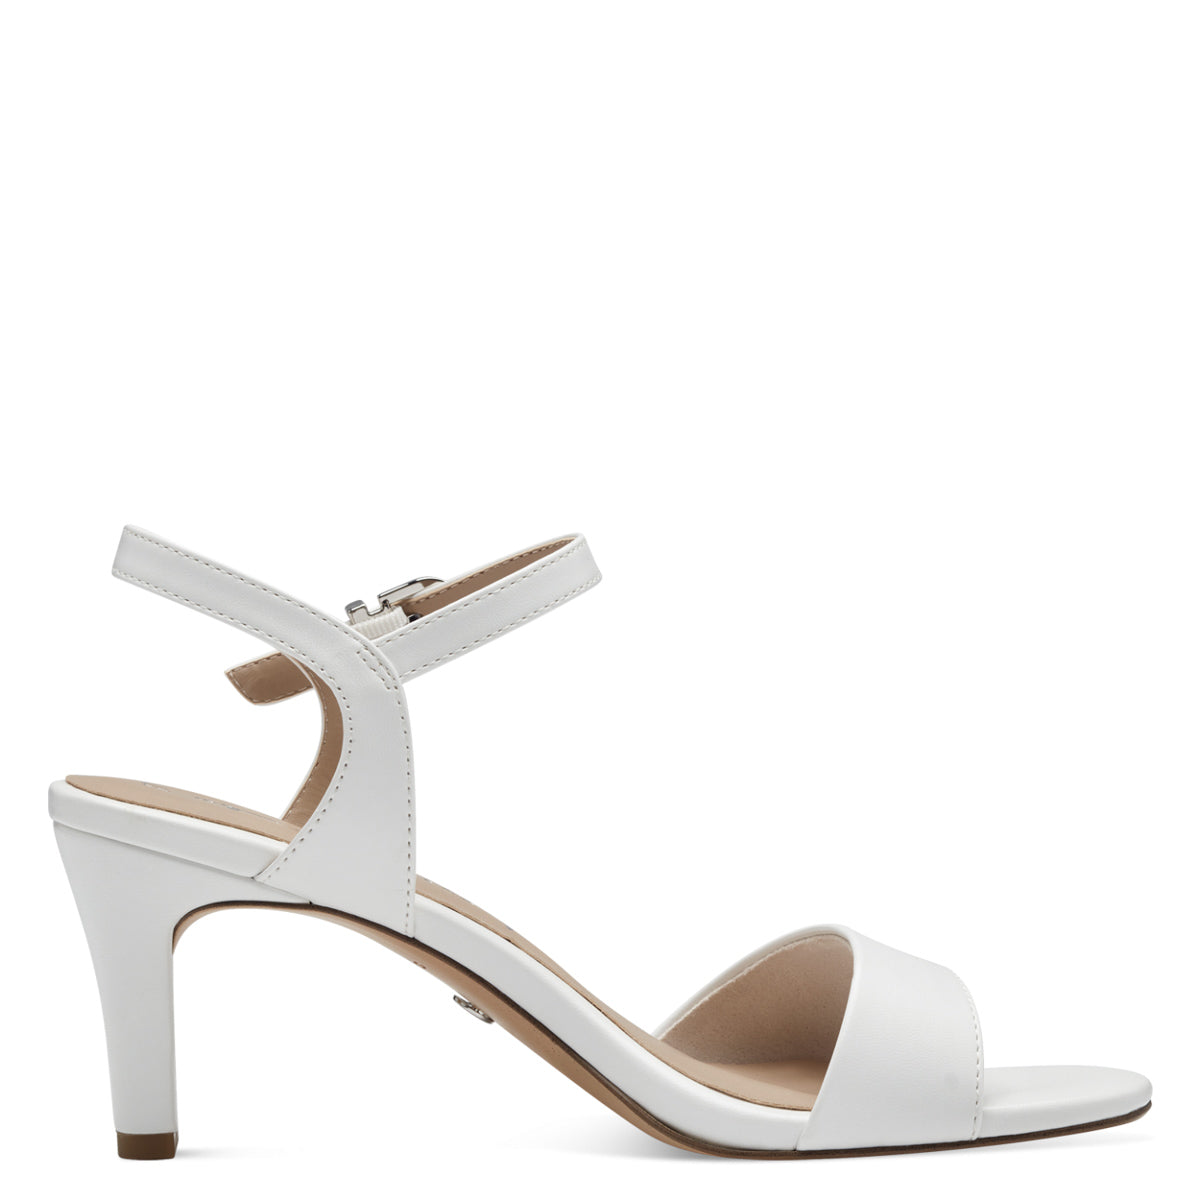  Close-up of the rounded toe and material detail of the Tamaris elegant white sandal.